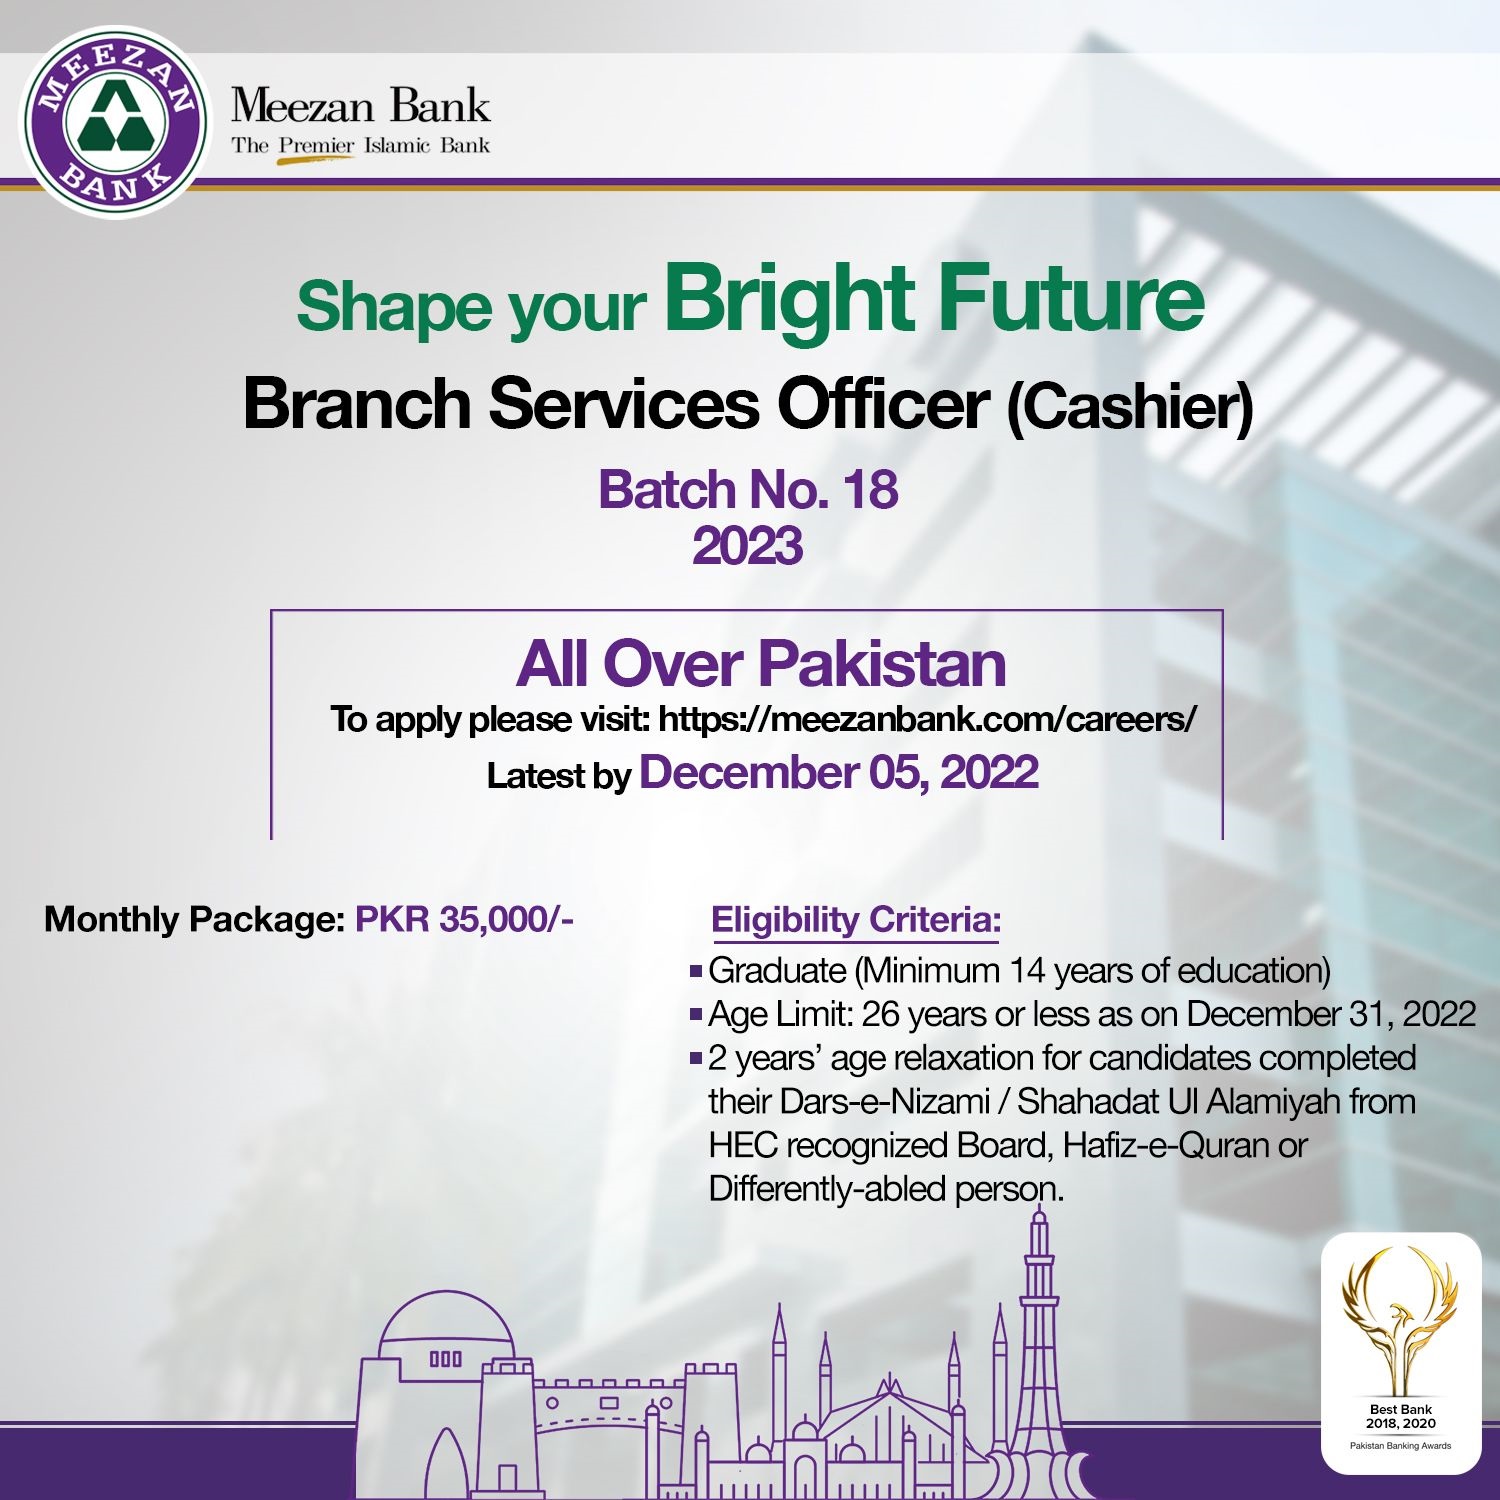 Meezan Bank is looking to hire Branch Services Officer (Cashier) Batch 2023